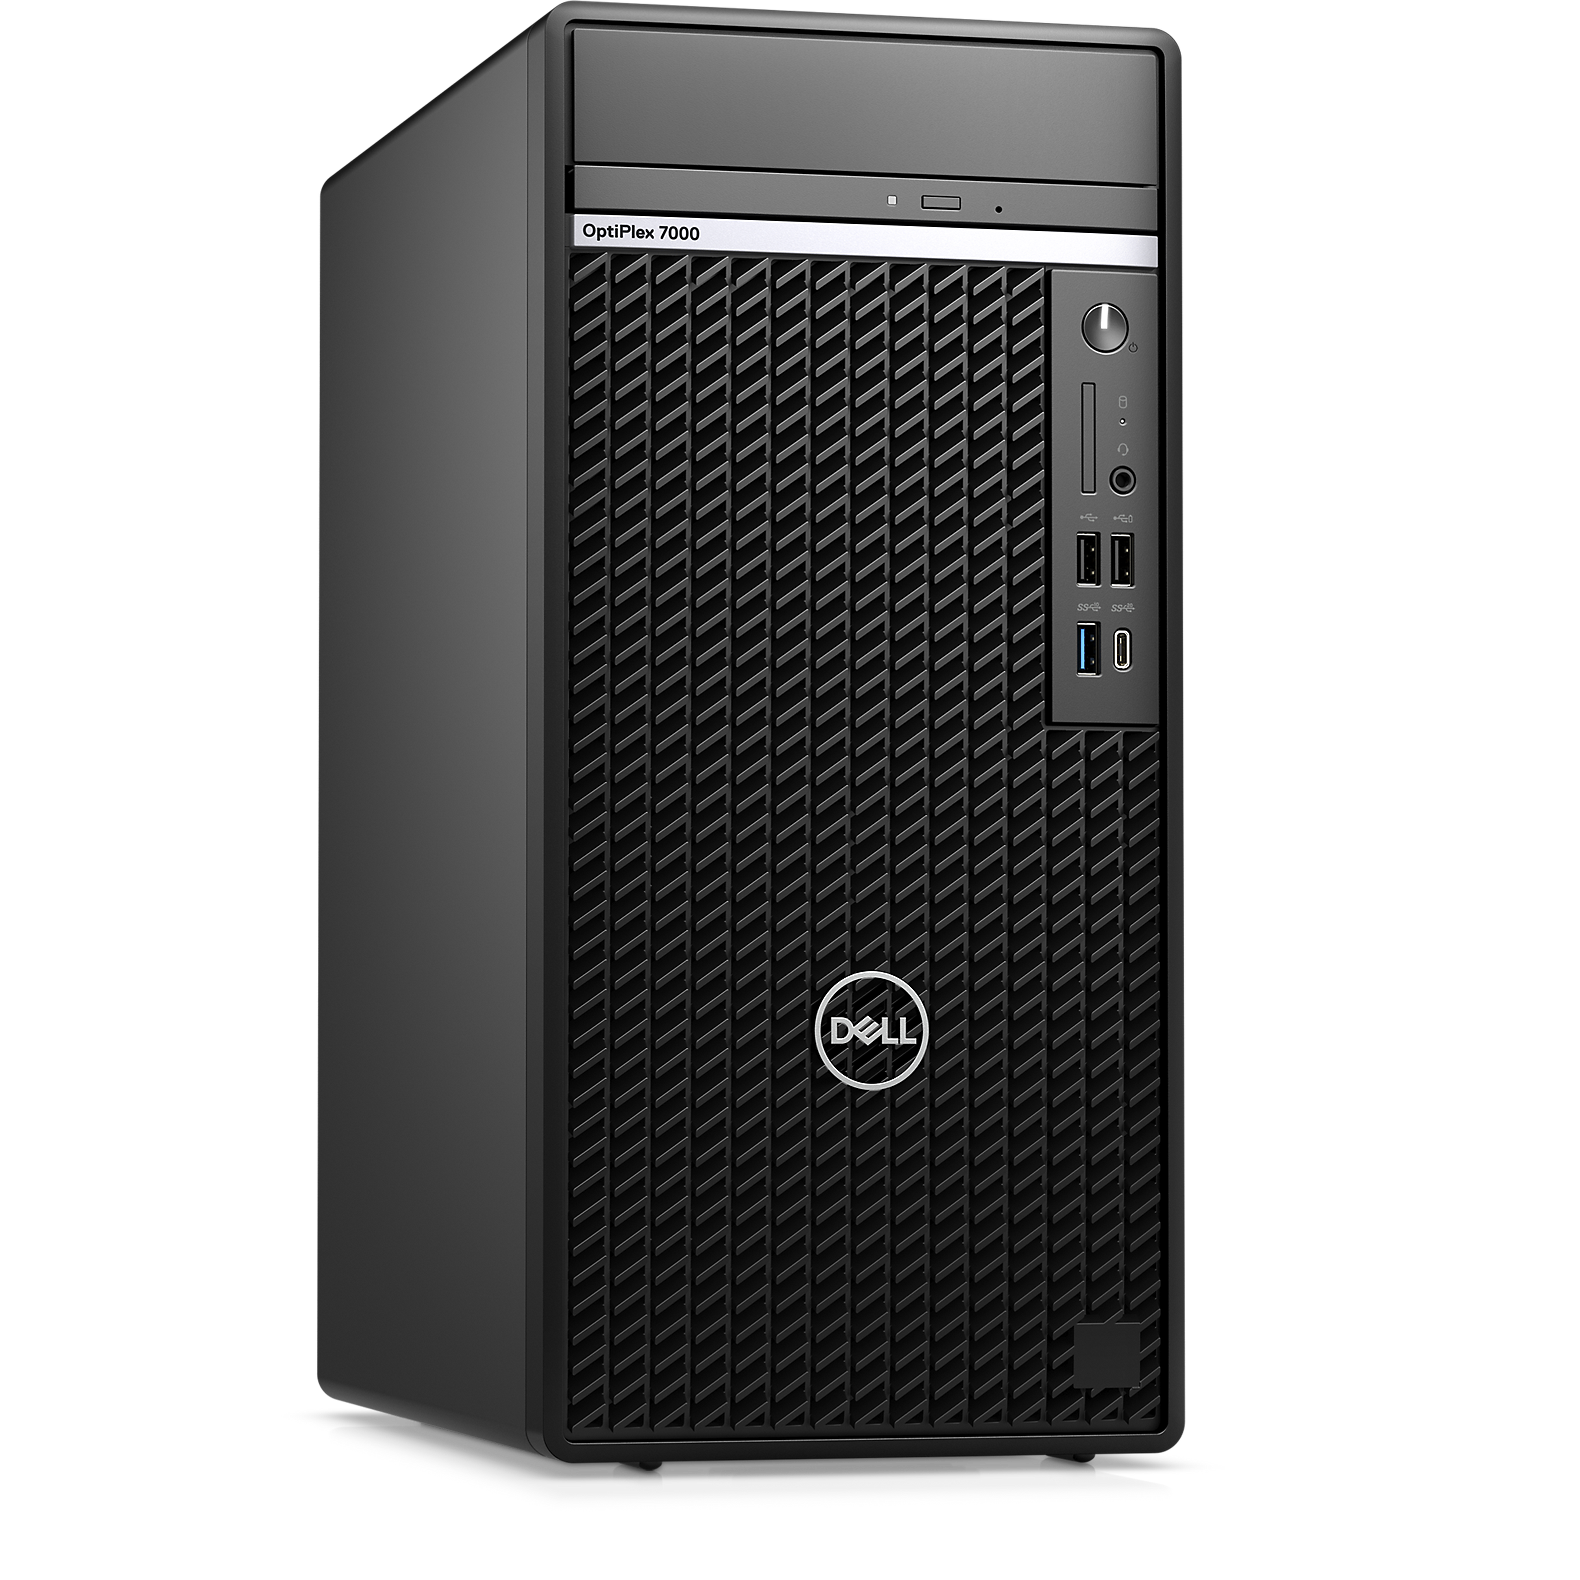 https://i.dell.com/is/image/DellContent/content/dam/ss2/products/desktops-and-all-in-ones/optiplex/7000-tsff/pdp/desktop-optiplex-7000tsff-pdp-mod02b.psd?wid=1920&hei=1580&fmt=png-alpha&qlt=90%2c0&op_usm=1.75%2c0.3%2c2%2c0&resMode=sharp&pscan=auto&fit=constrain%2c1&align=0%2c0